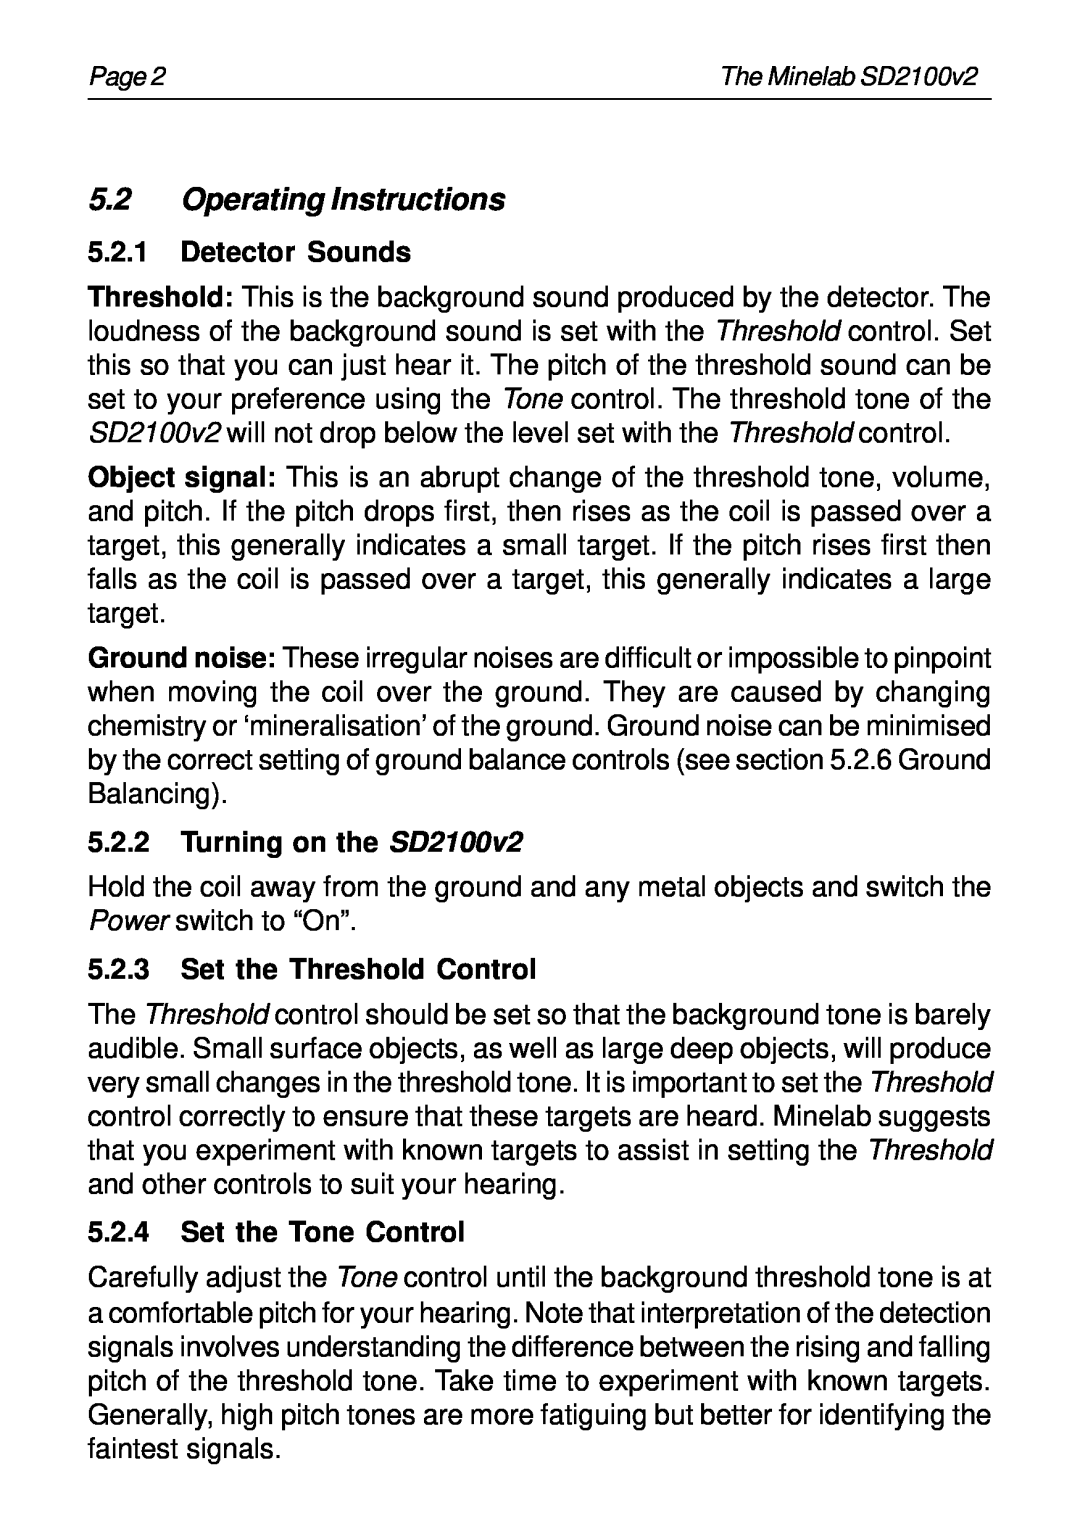 Minelab instruction manual Operating Instructions, Detector Sounds, Turning on the SD2100v2, Set the Threshold Control 